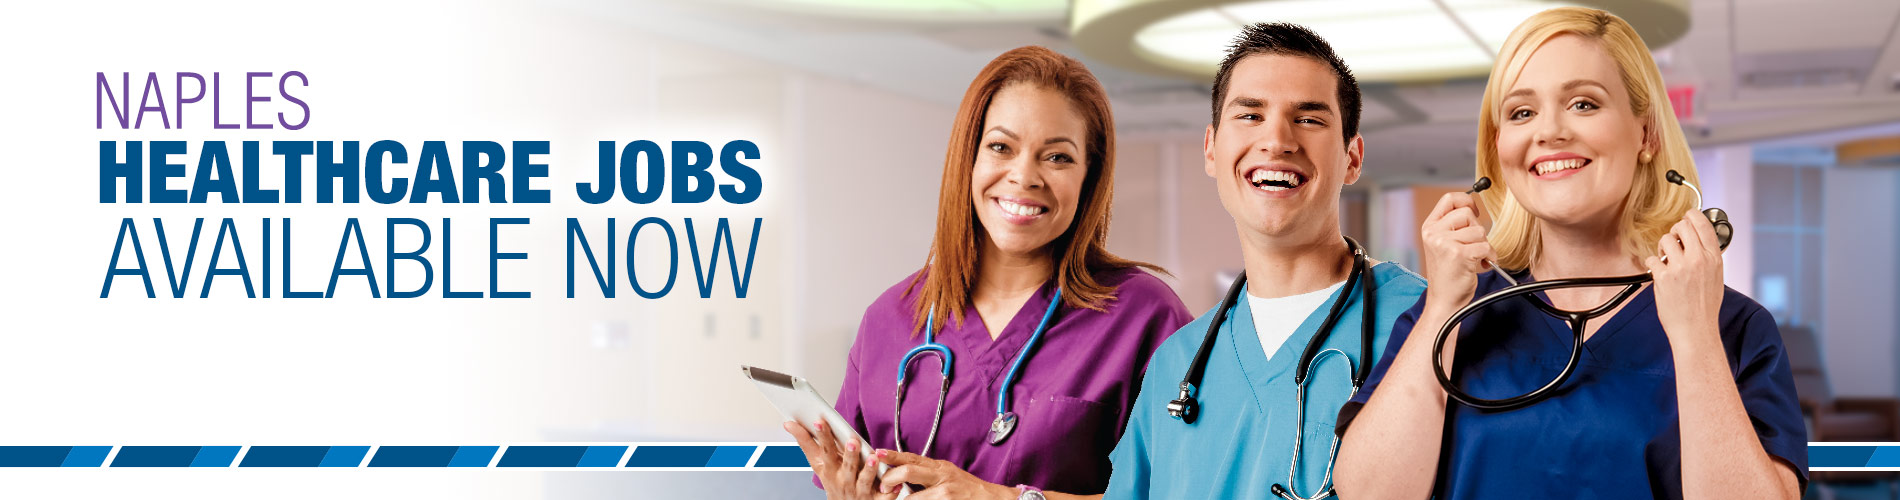 Home Page Naples Healthcare Jobs Banner